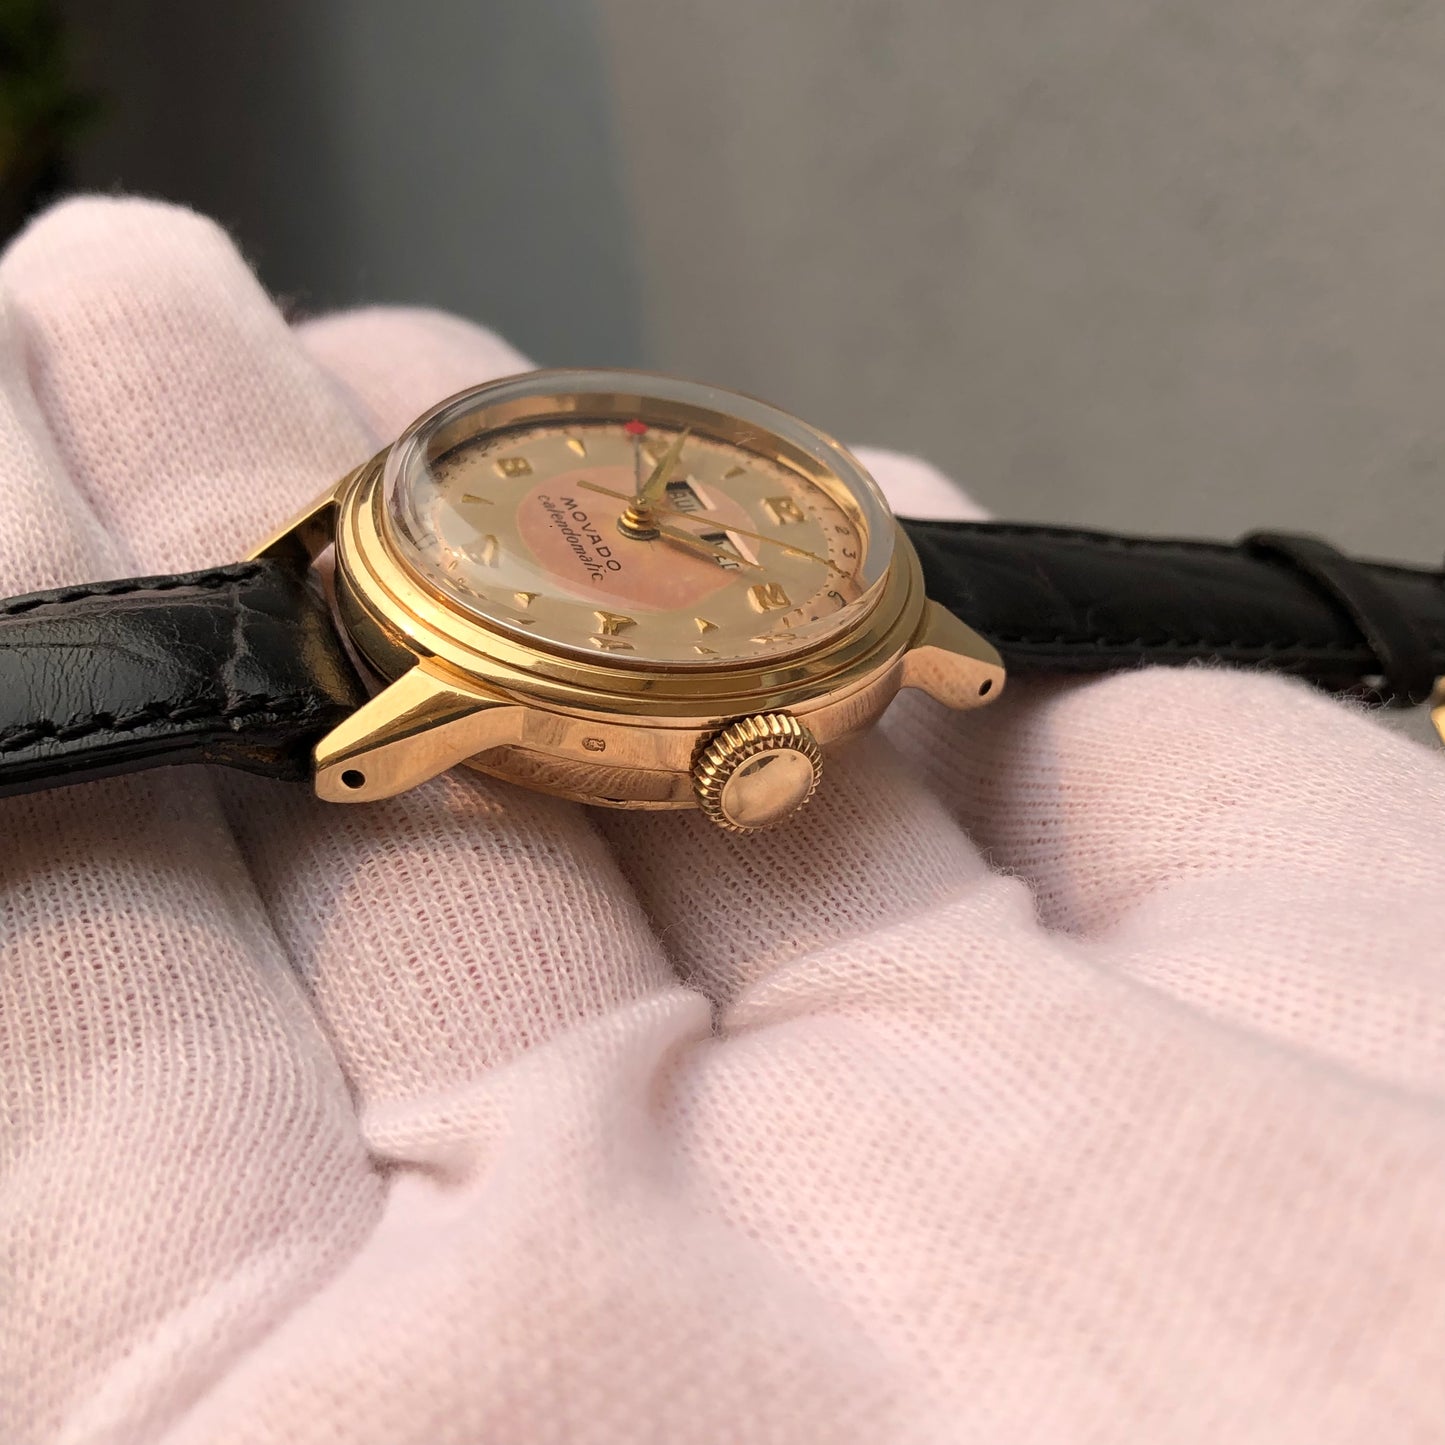 1950s Vintage Movado Calendomatic 46351 Triple Date 14K Yellow Gold Automatic Wristwatch - Hashtag Watch Company